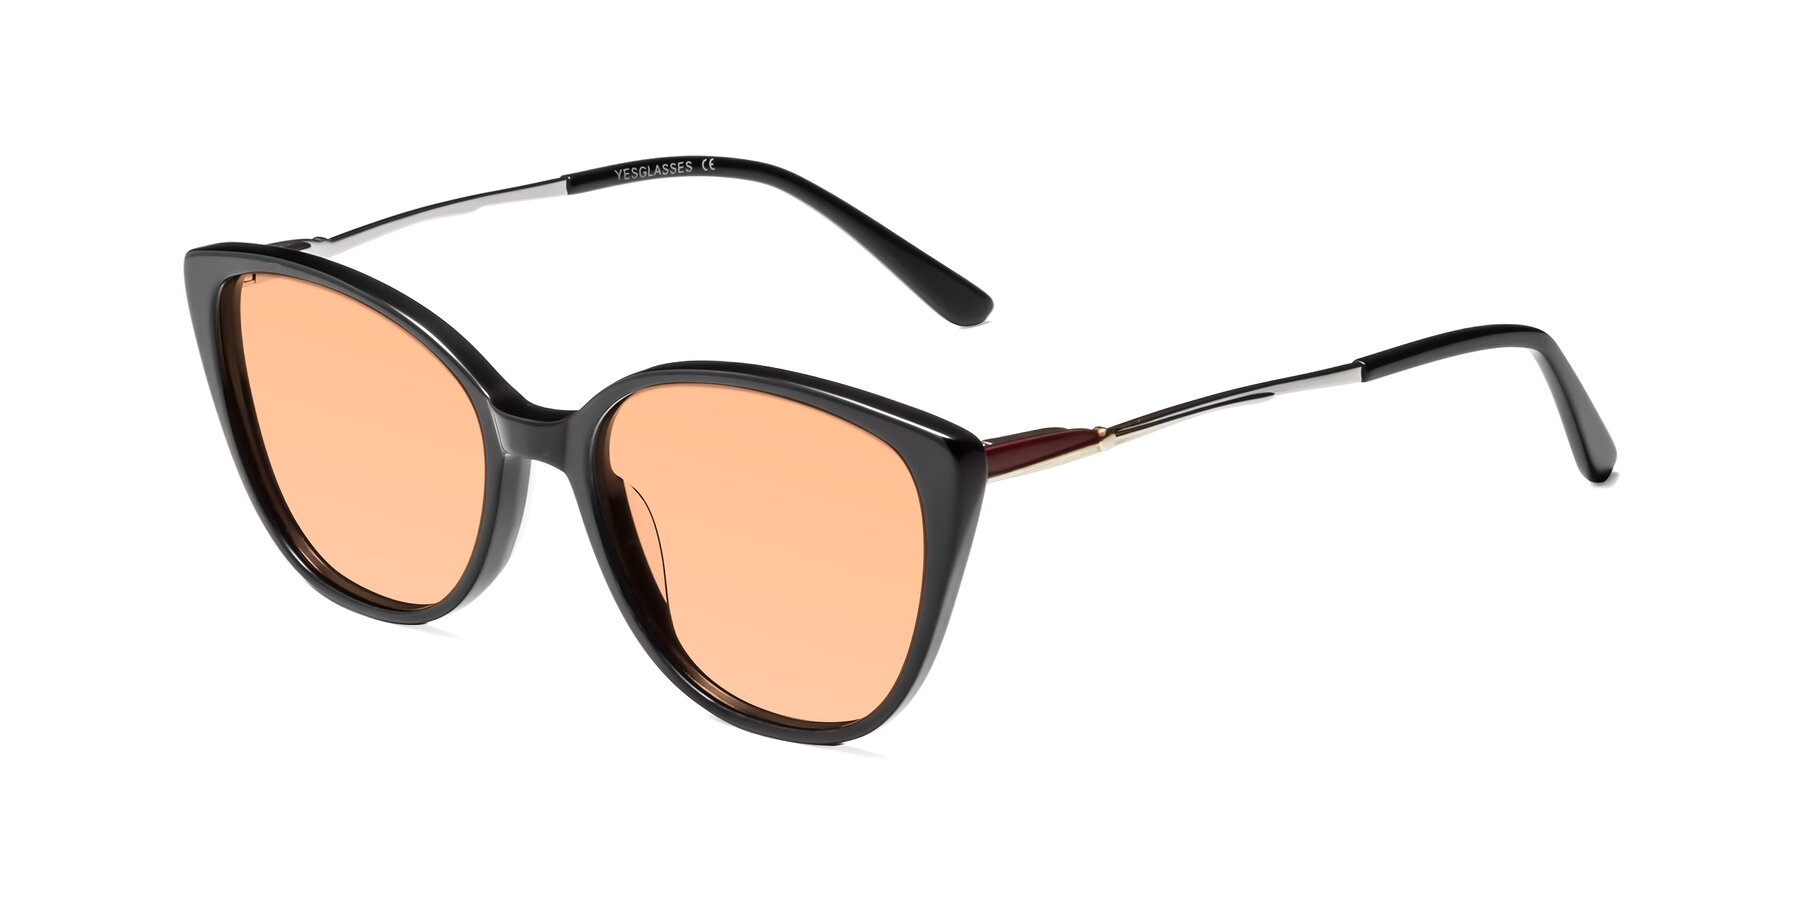 Angle of 17424 in Black with Light Orange Tinted Lenses